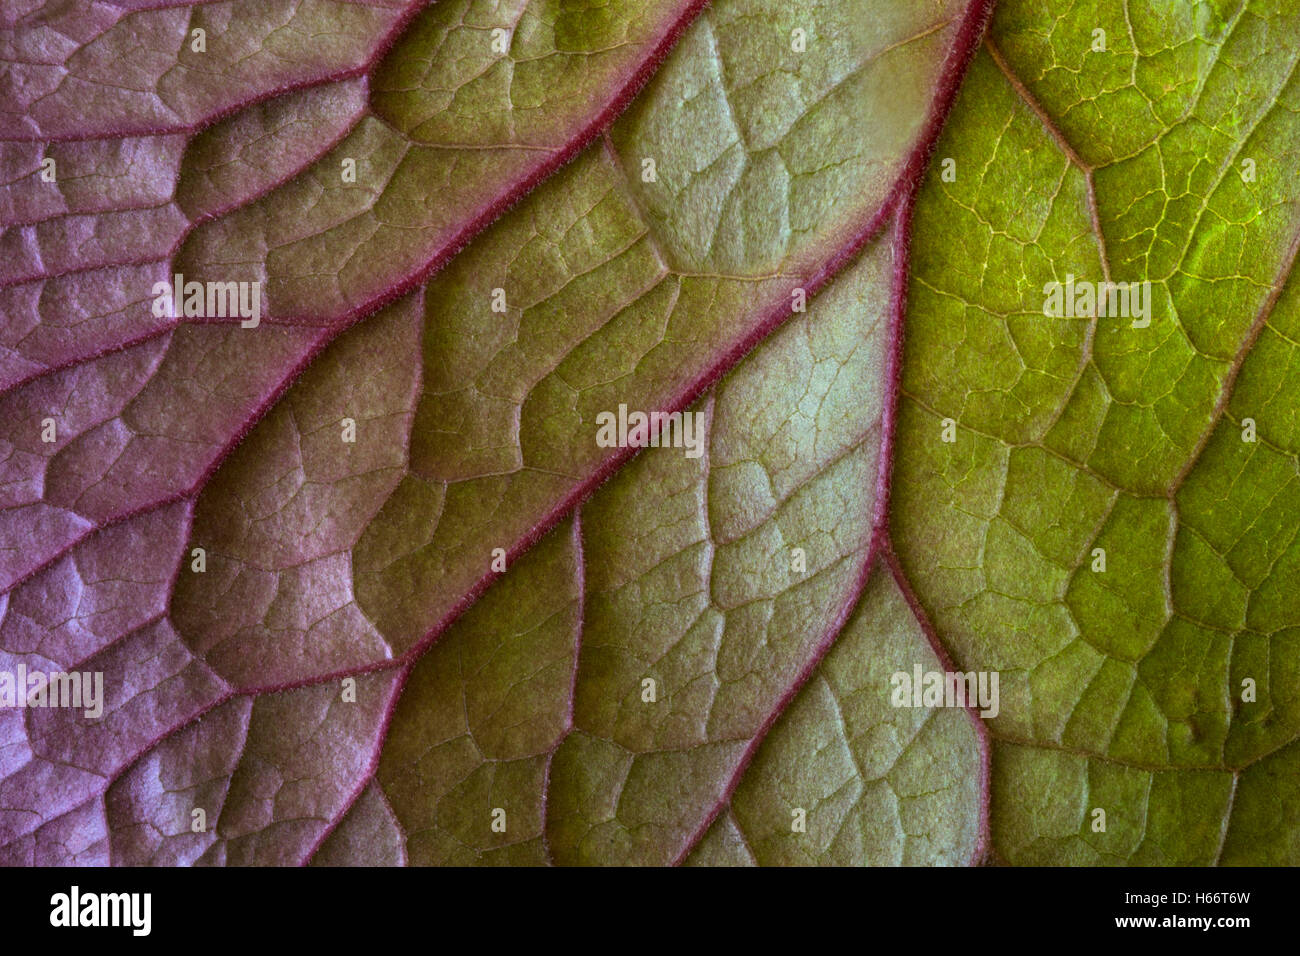 Underside of a leaf showing the veins. Stock Photo